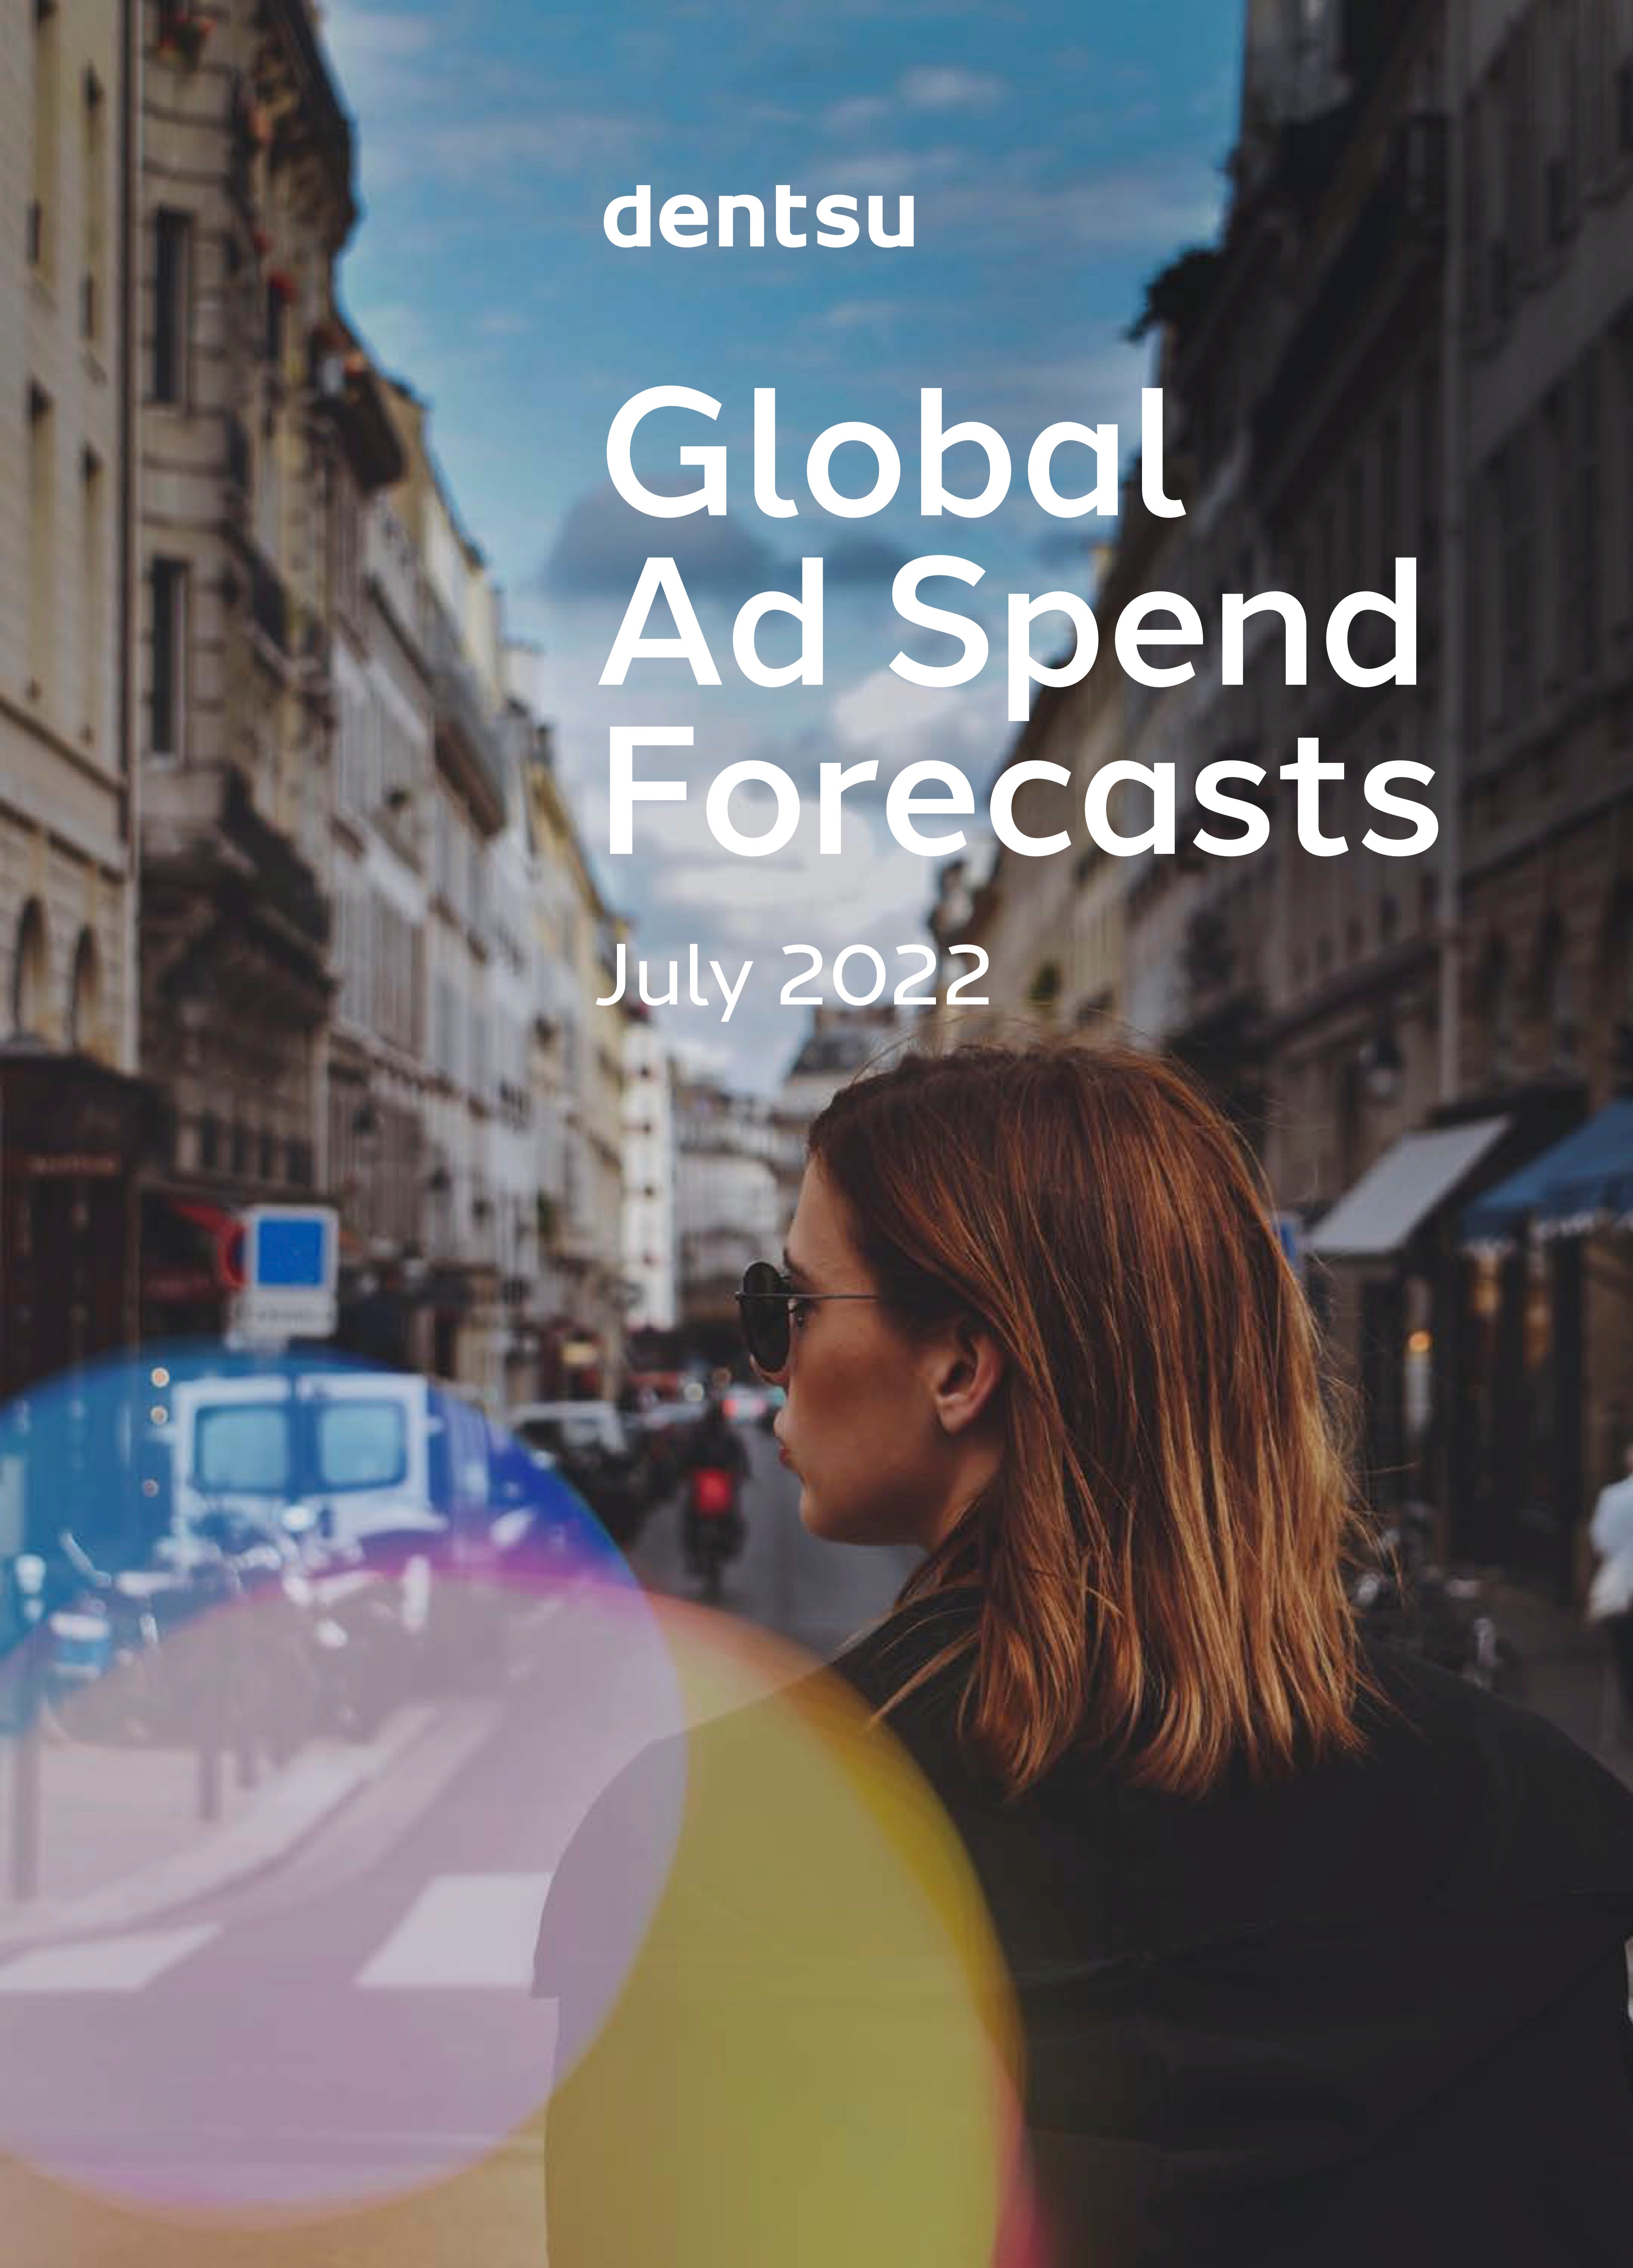 Global Ad Spend Forecasts July 2022